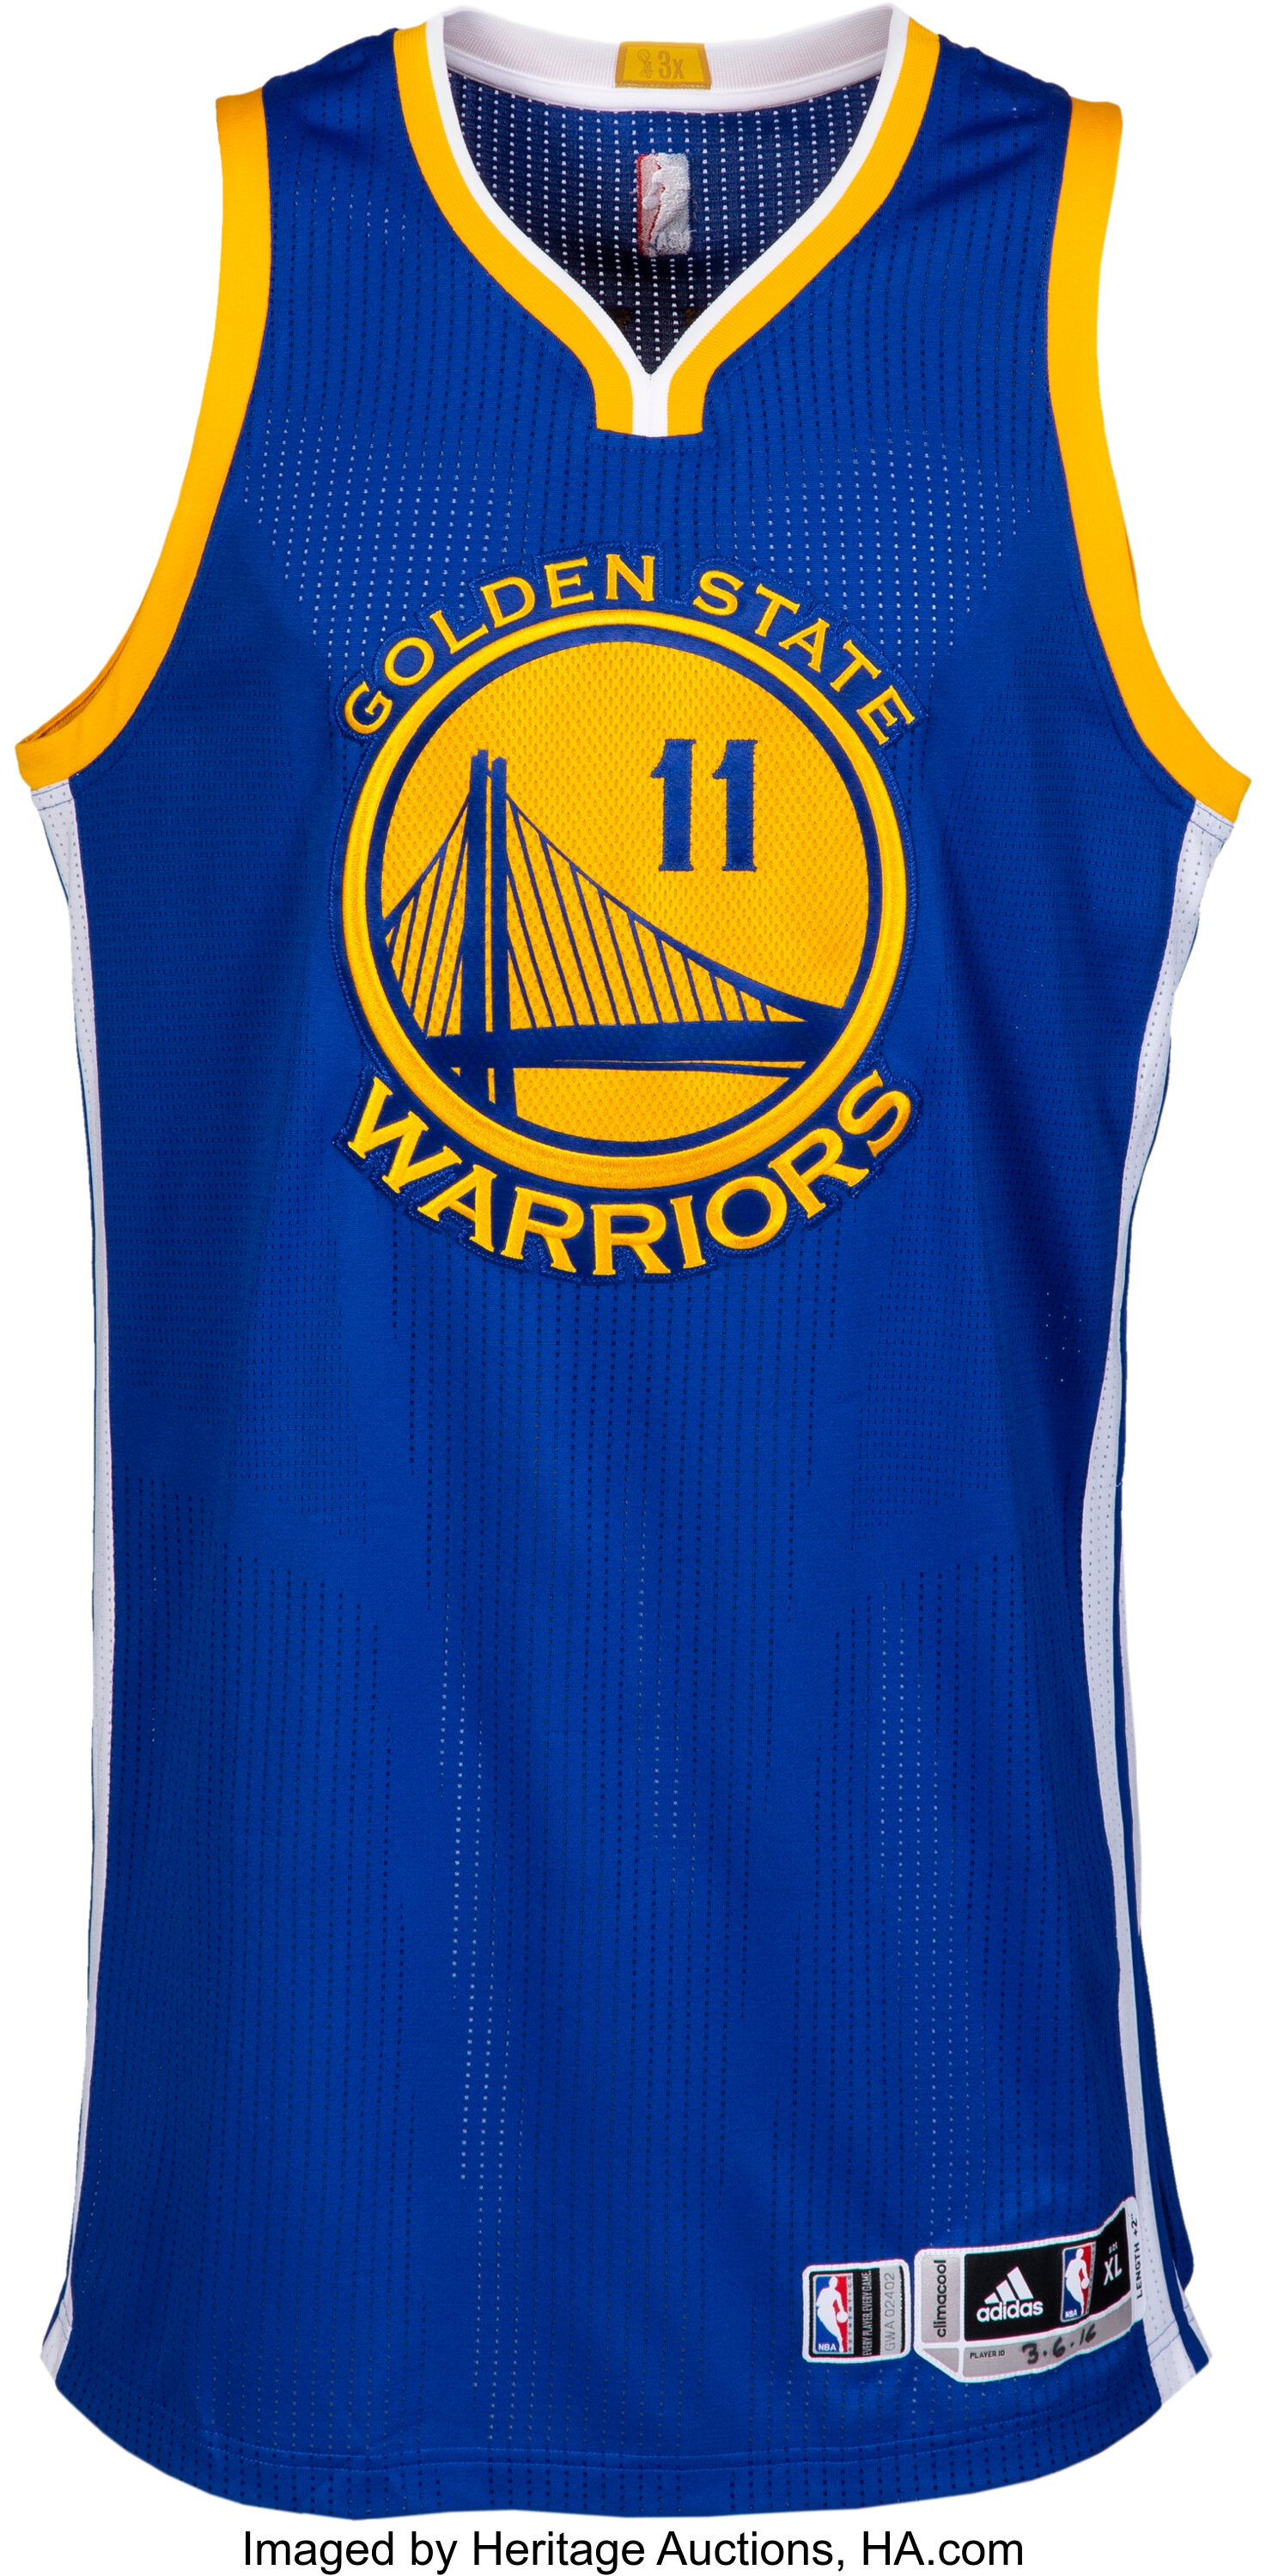 Klay Thompson - Golden State Warriors - Game-Worn City Edition